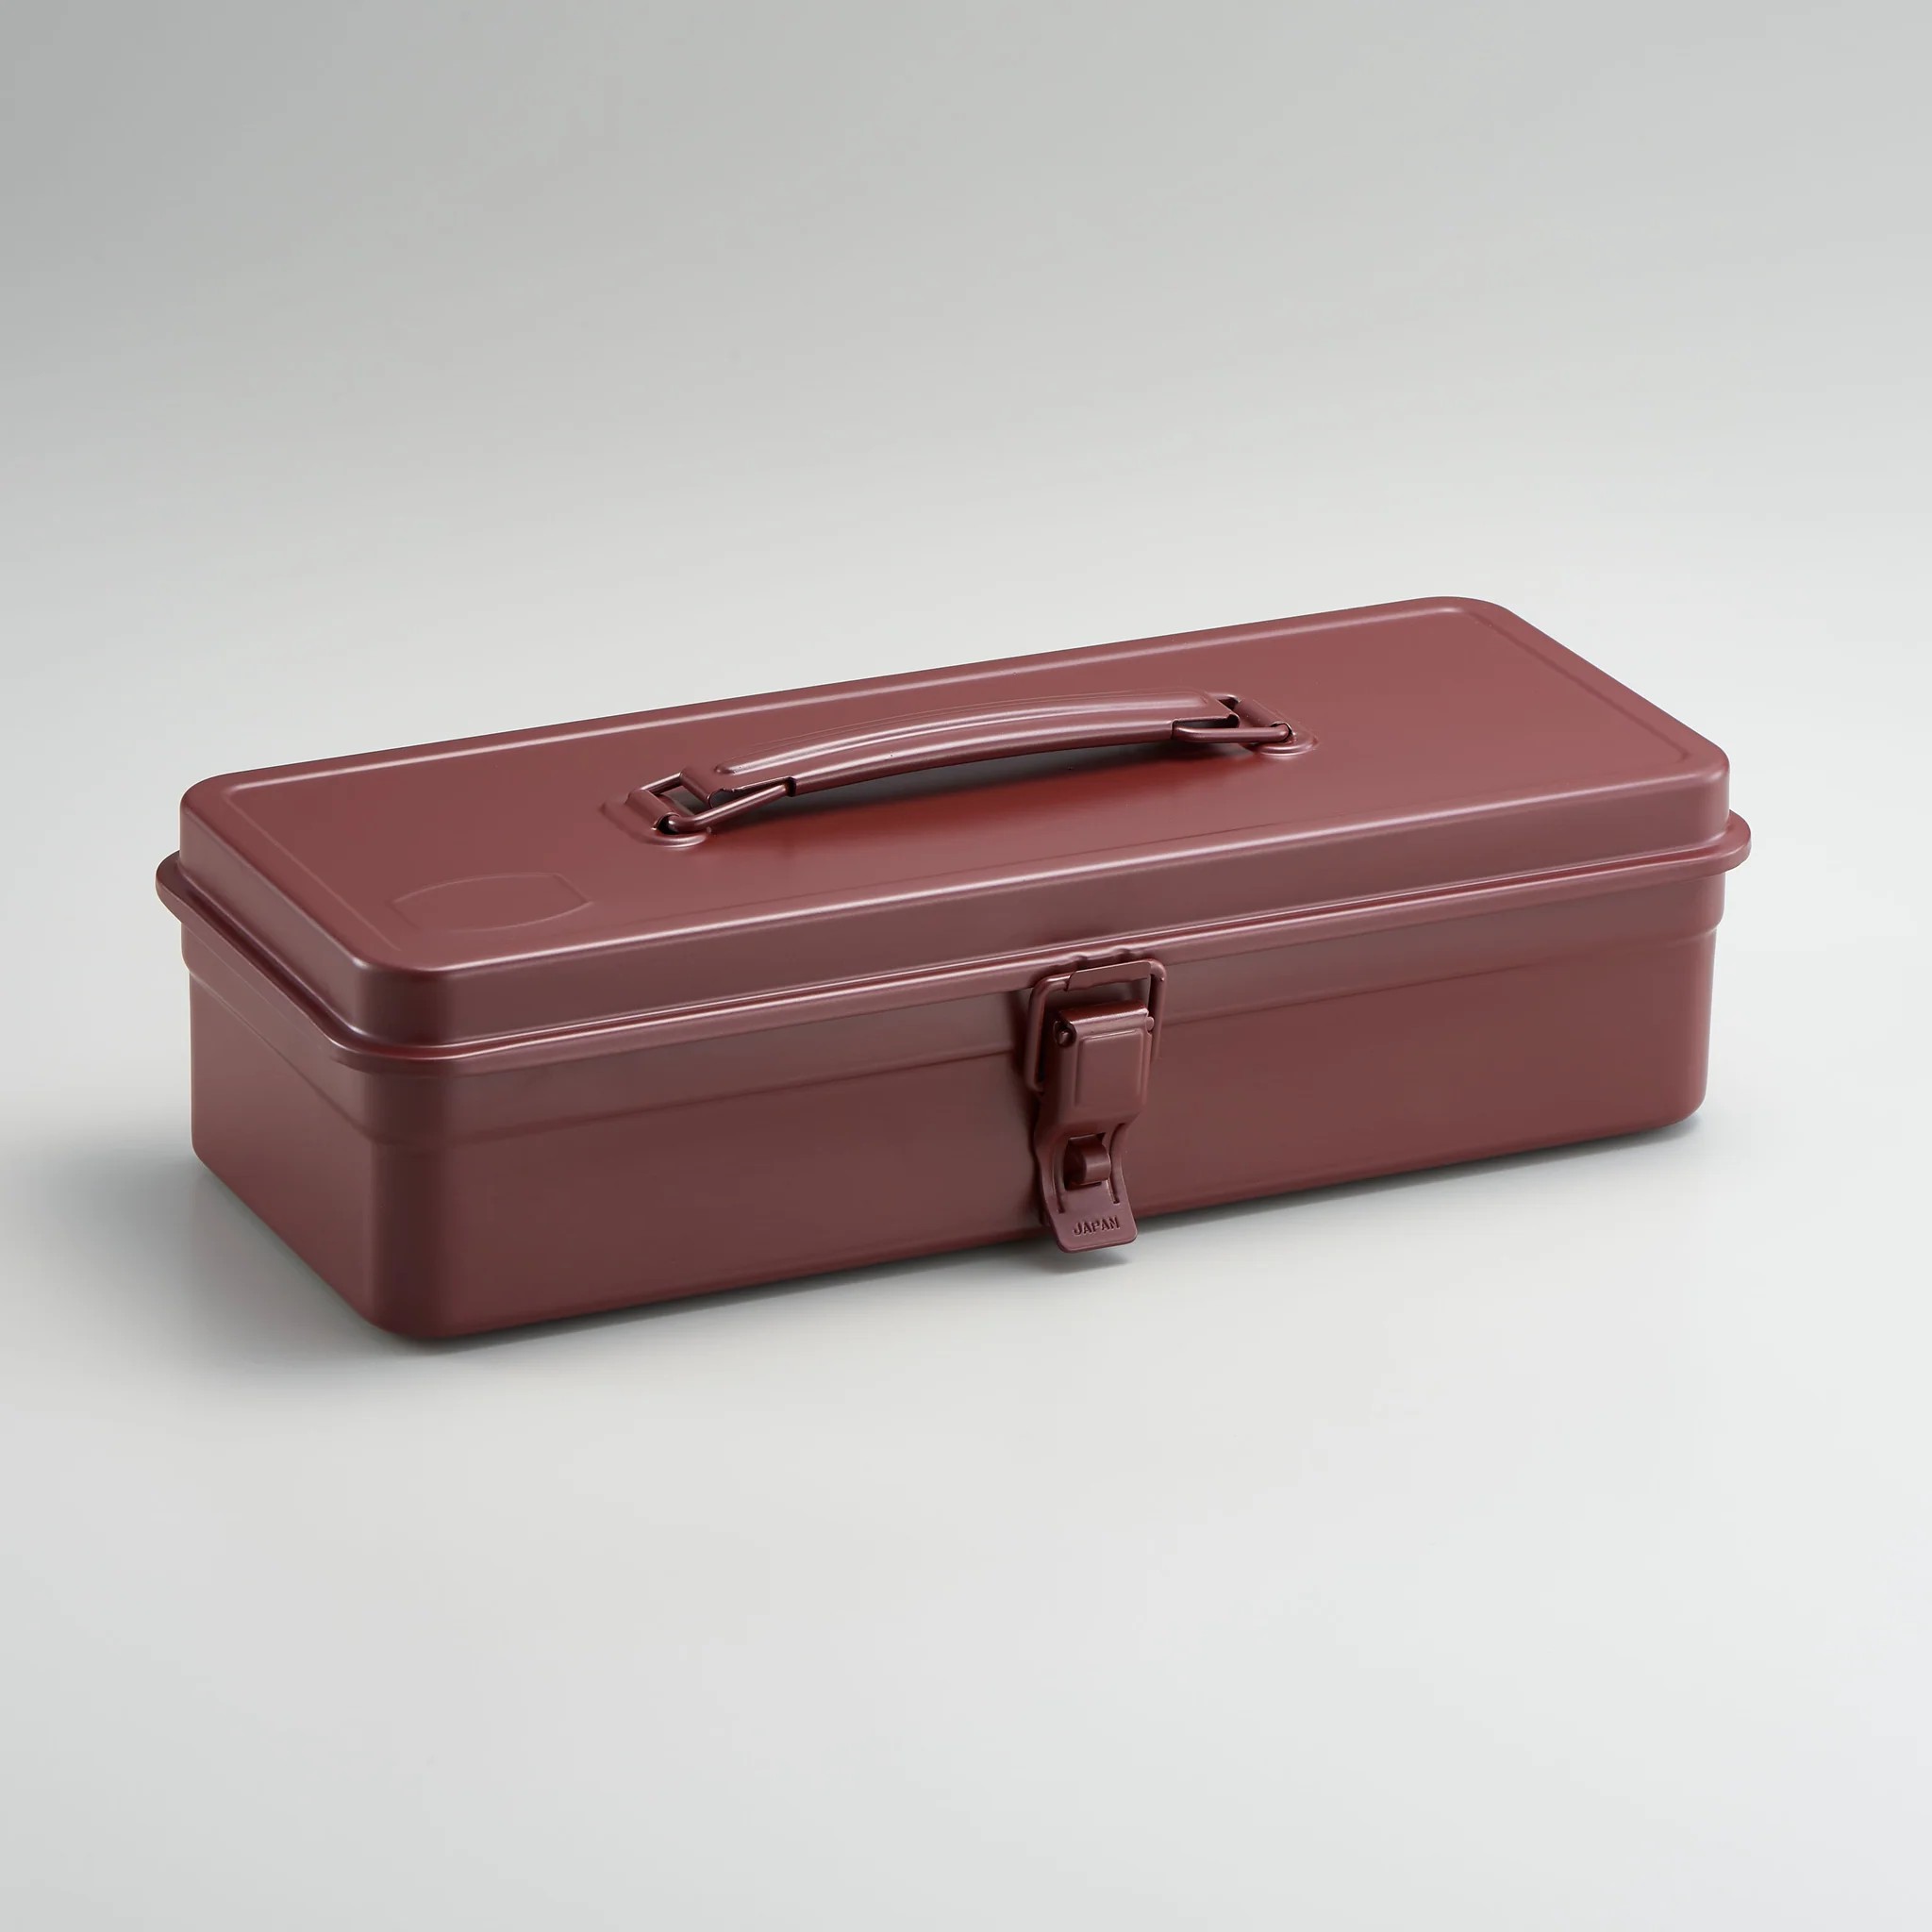 TOYO STEEL T-320 TOOL BOX - ANTIQUE BROWN